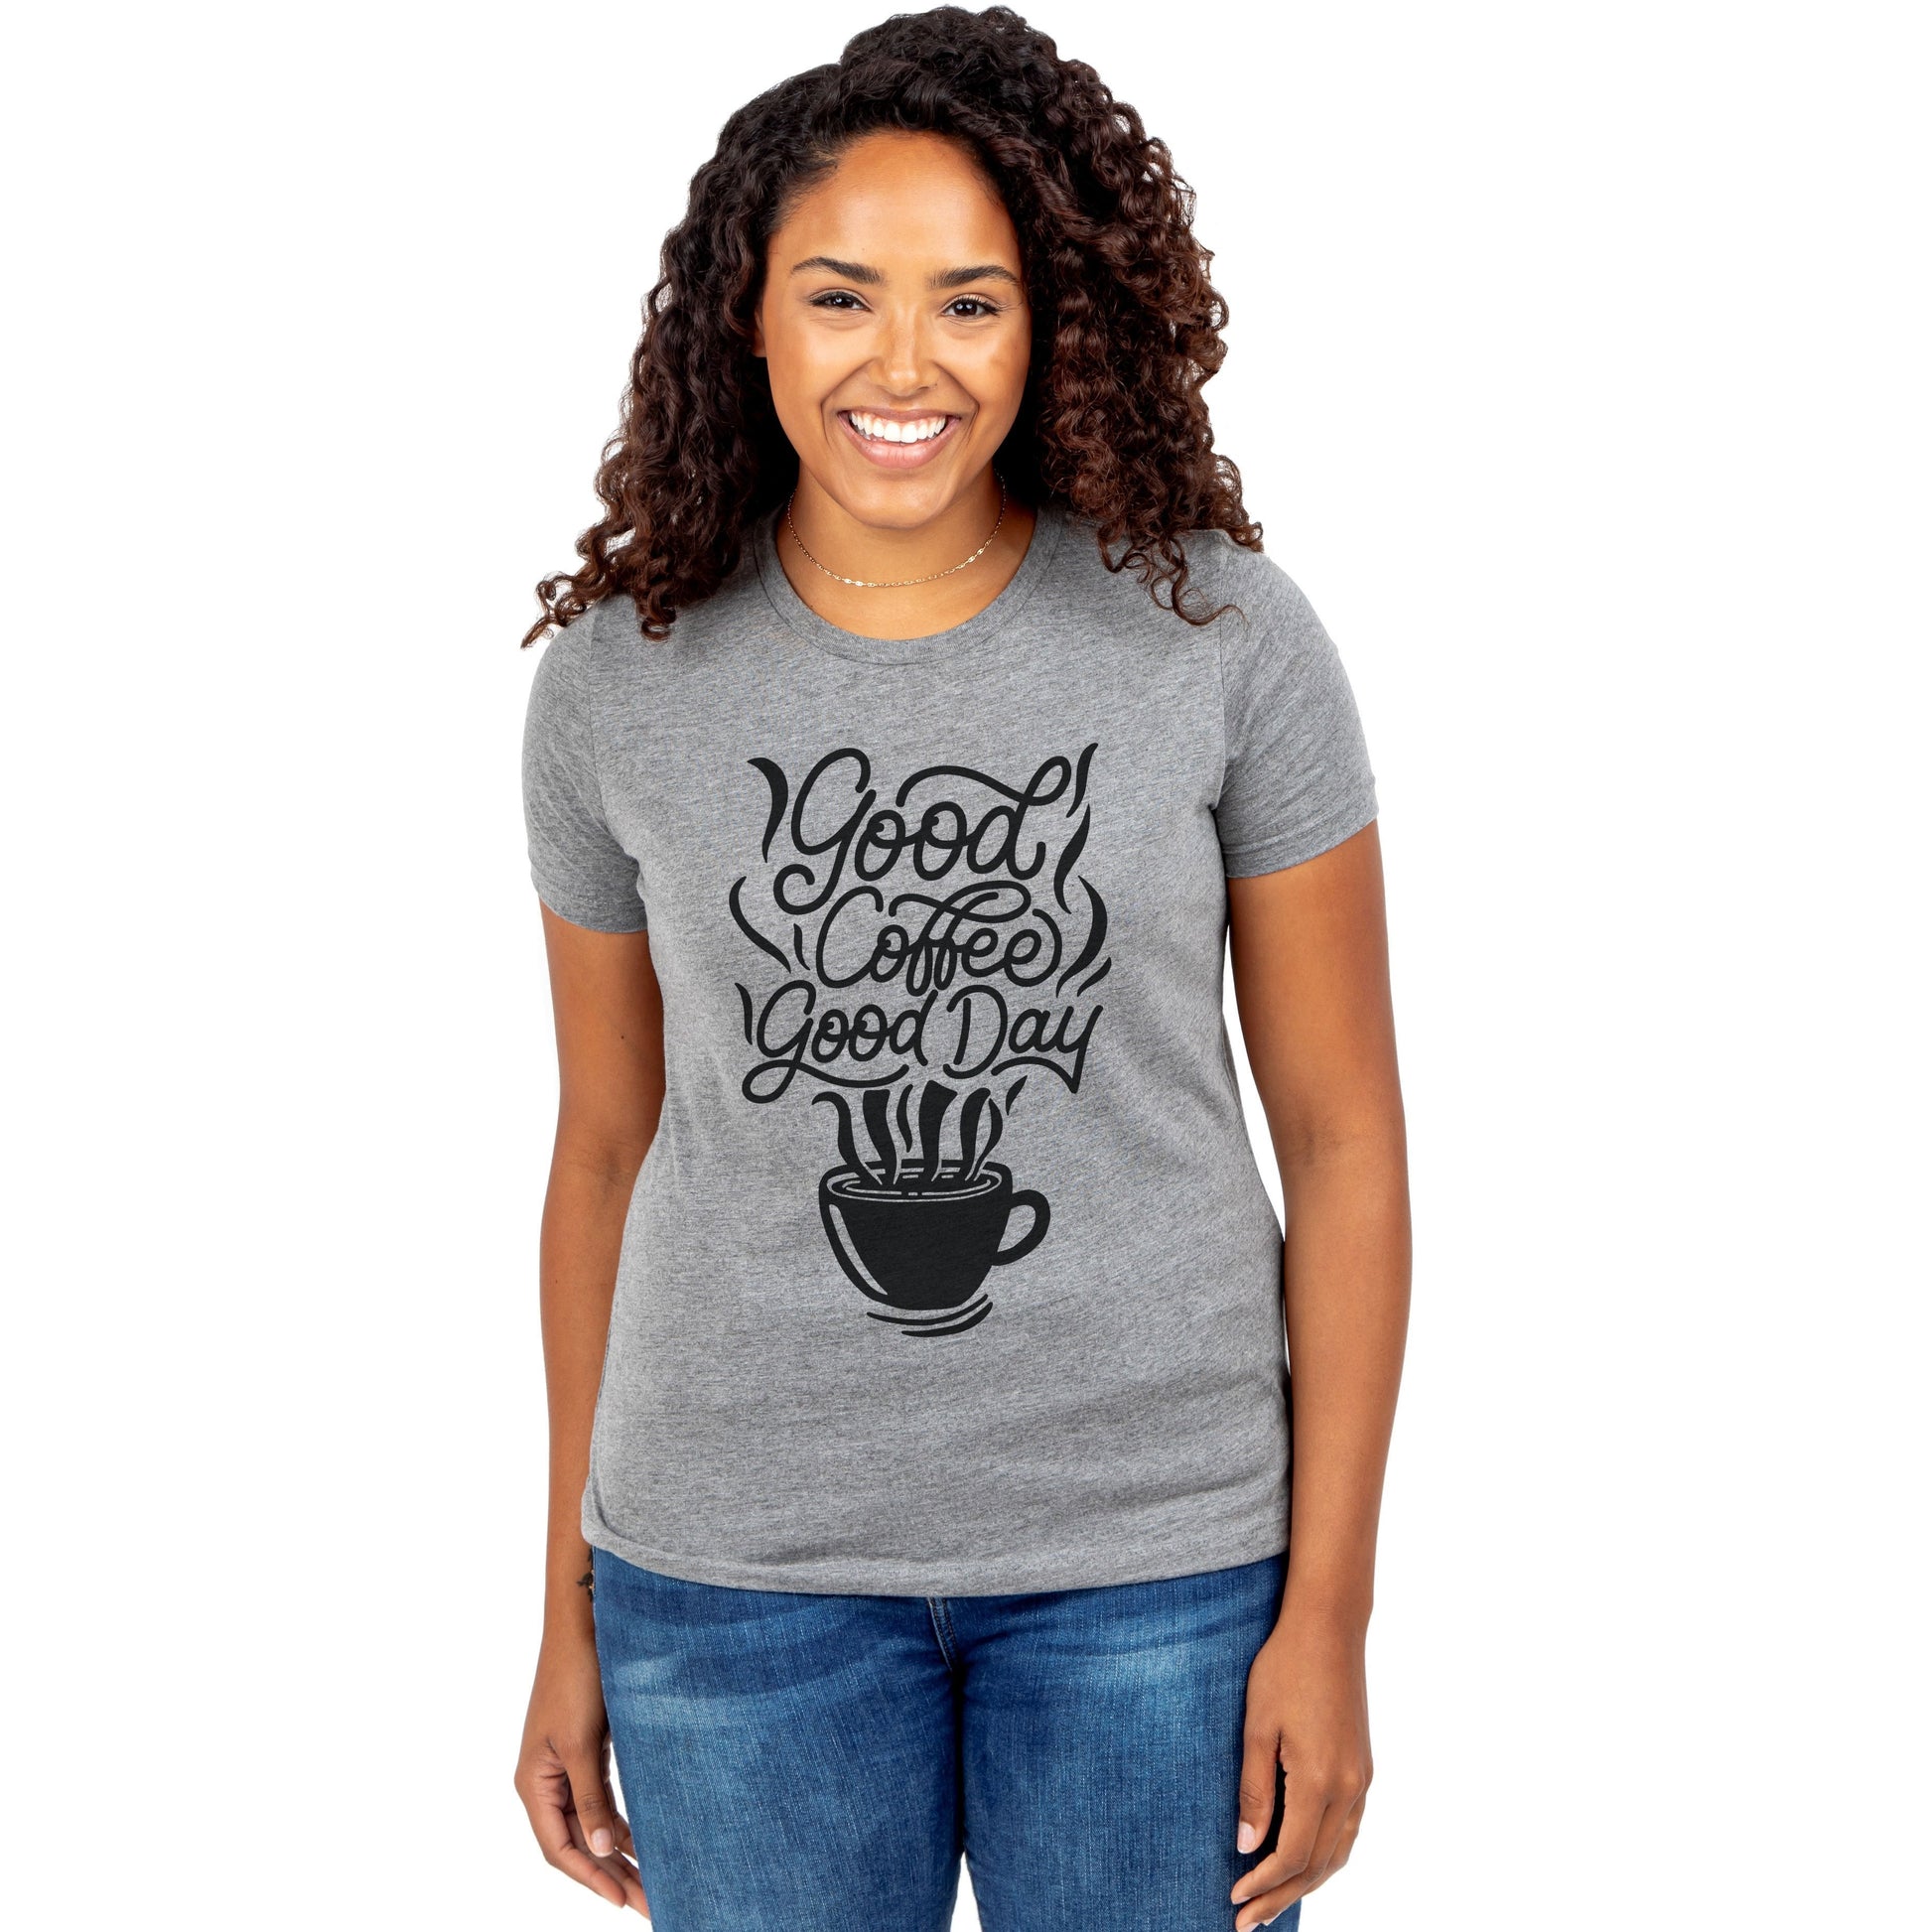 Good Coffee Good Day - Stories You Can Wear by Thread Tank